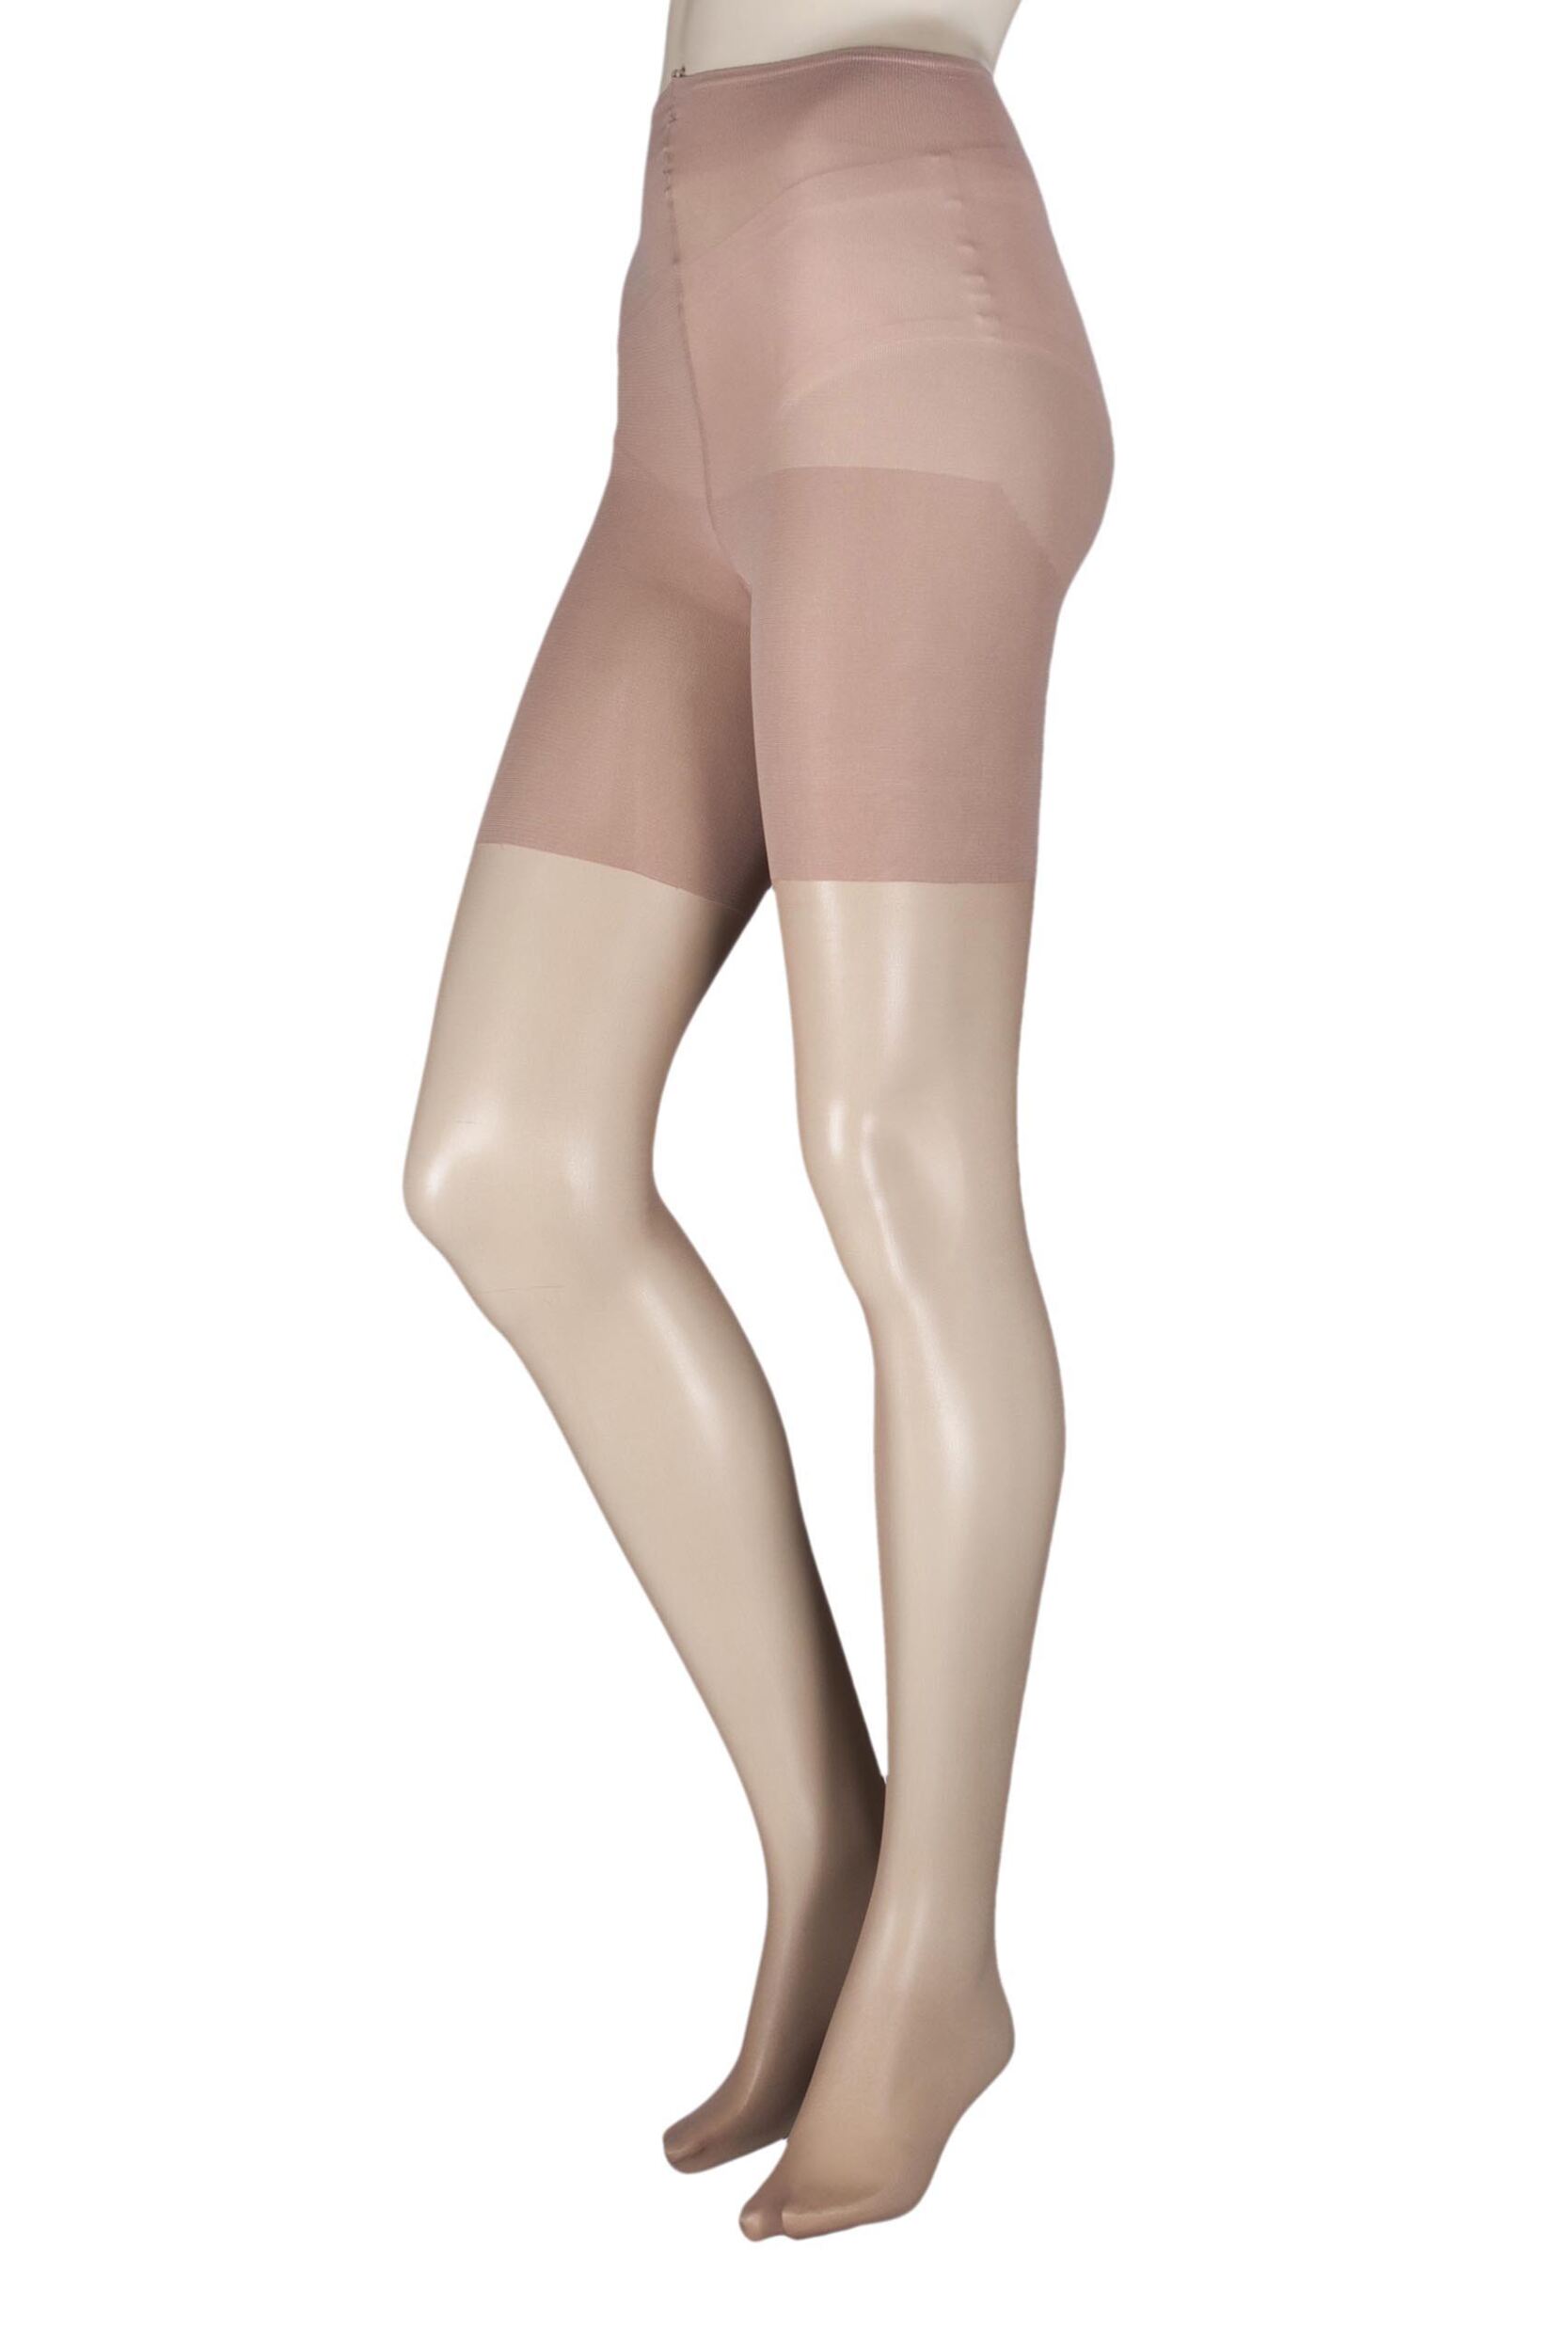 Image of Ladies 1 Pair Pretty Legs Xceptionelle Plus Size Lycra Tights